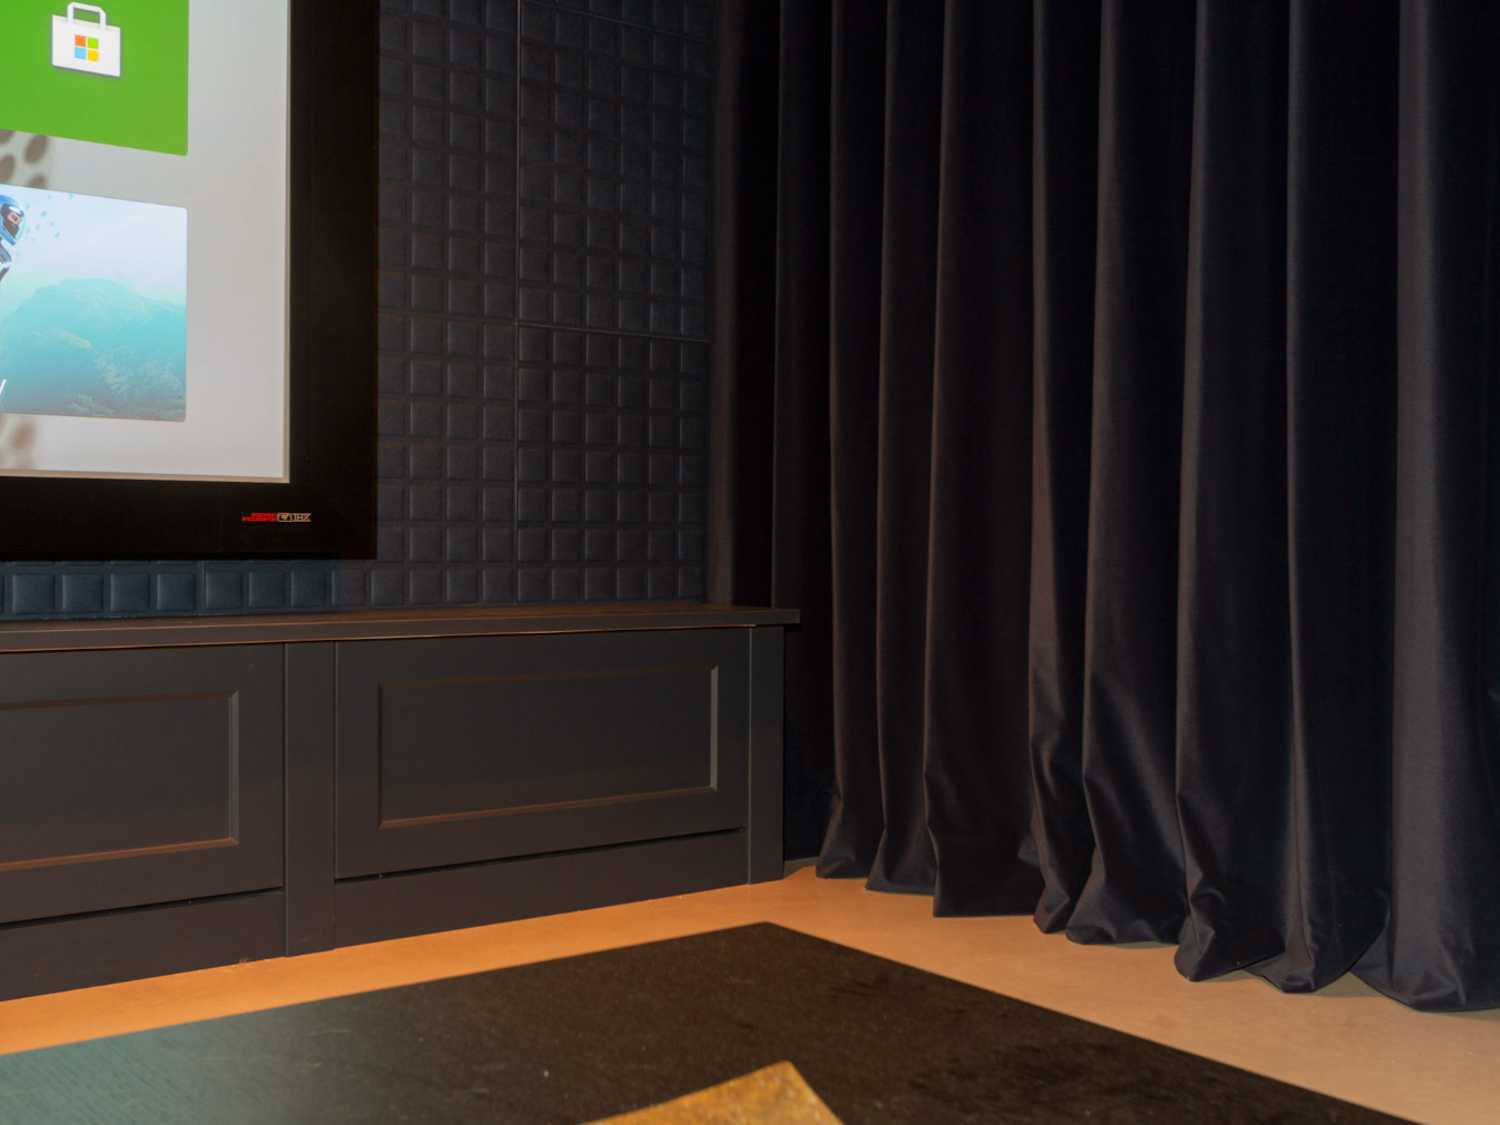 Acoustic treatment of the room including a front wall baffle ensures maximum performance from the audio kit